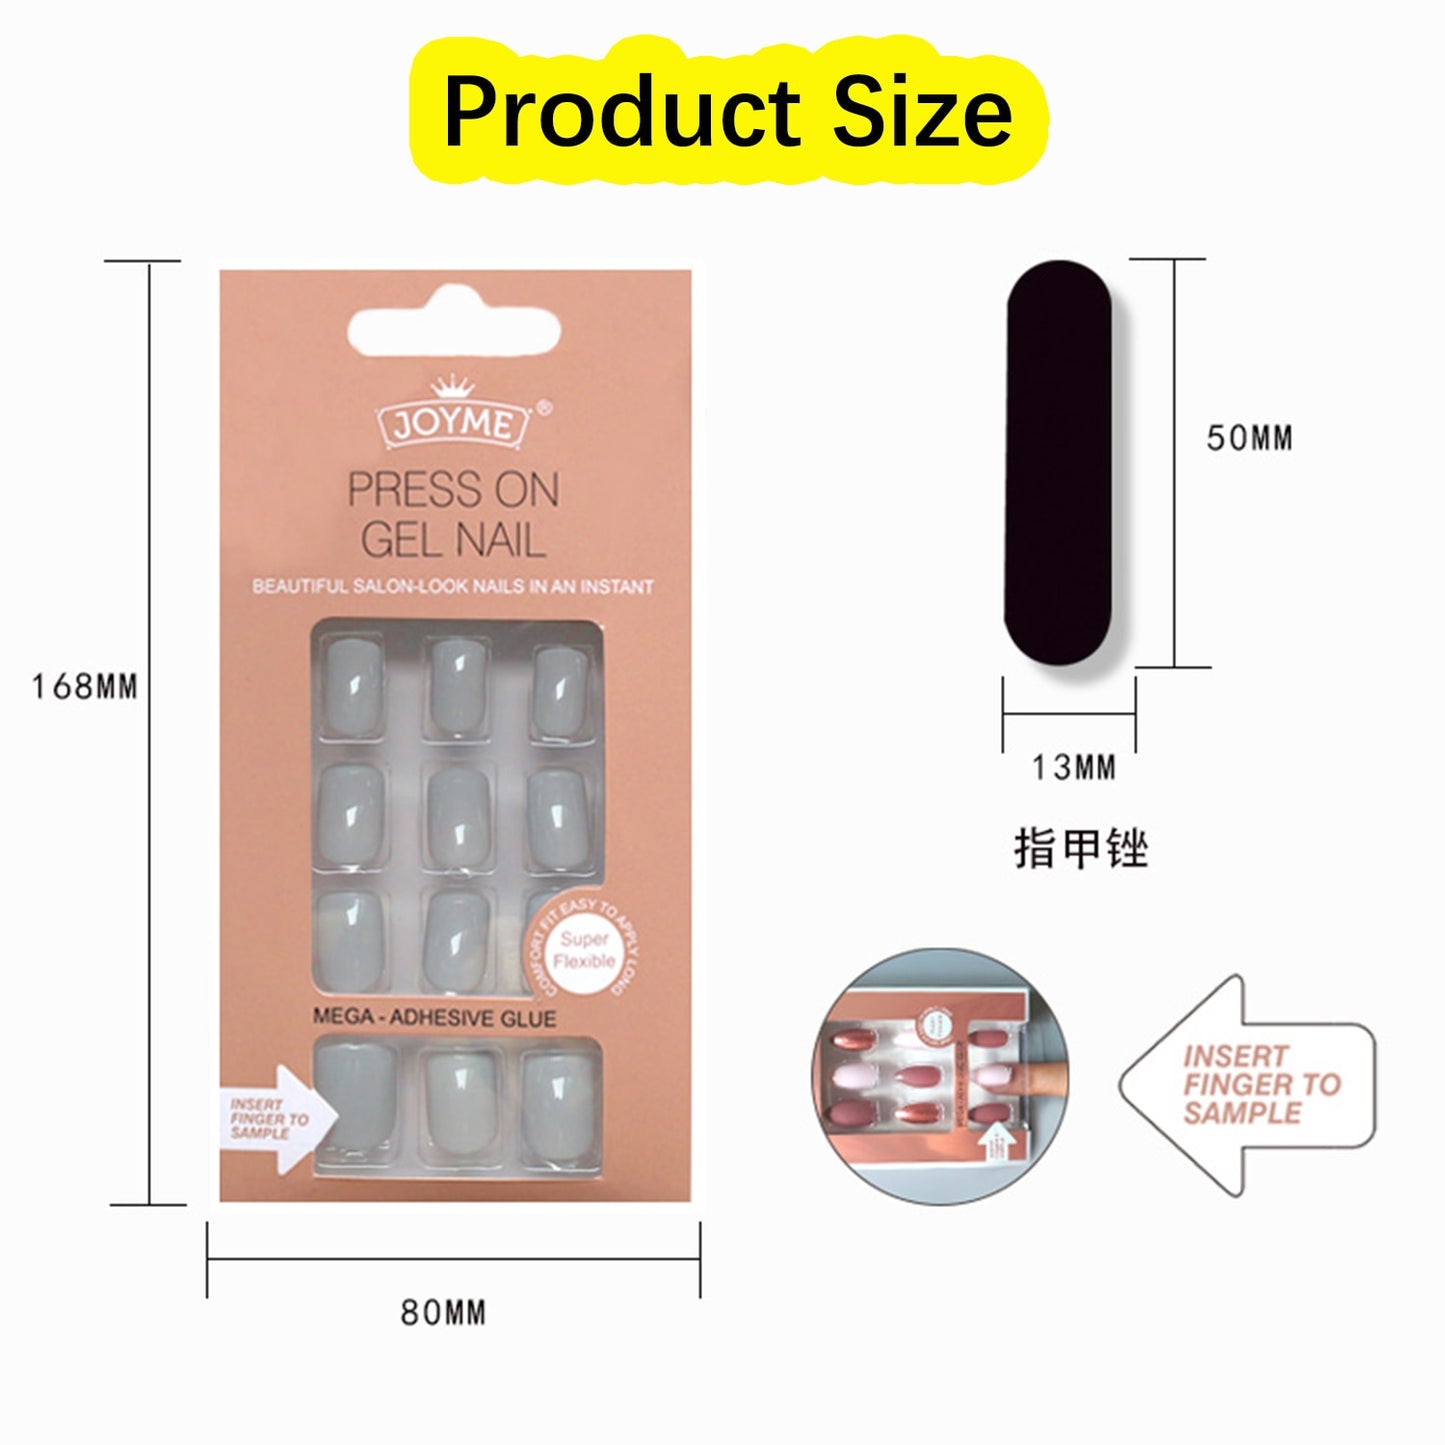 Press on Nails 24pc Nails Art Fake Nail SquareTips False Press on Coffin with Glue Stick Designs Clear Display Short Set Full